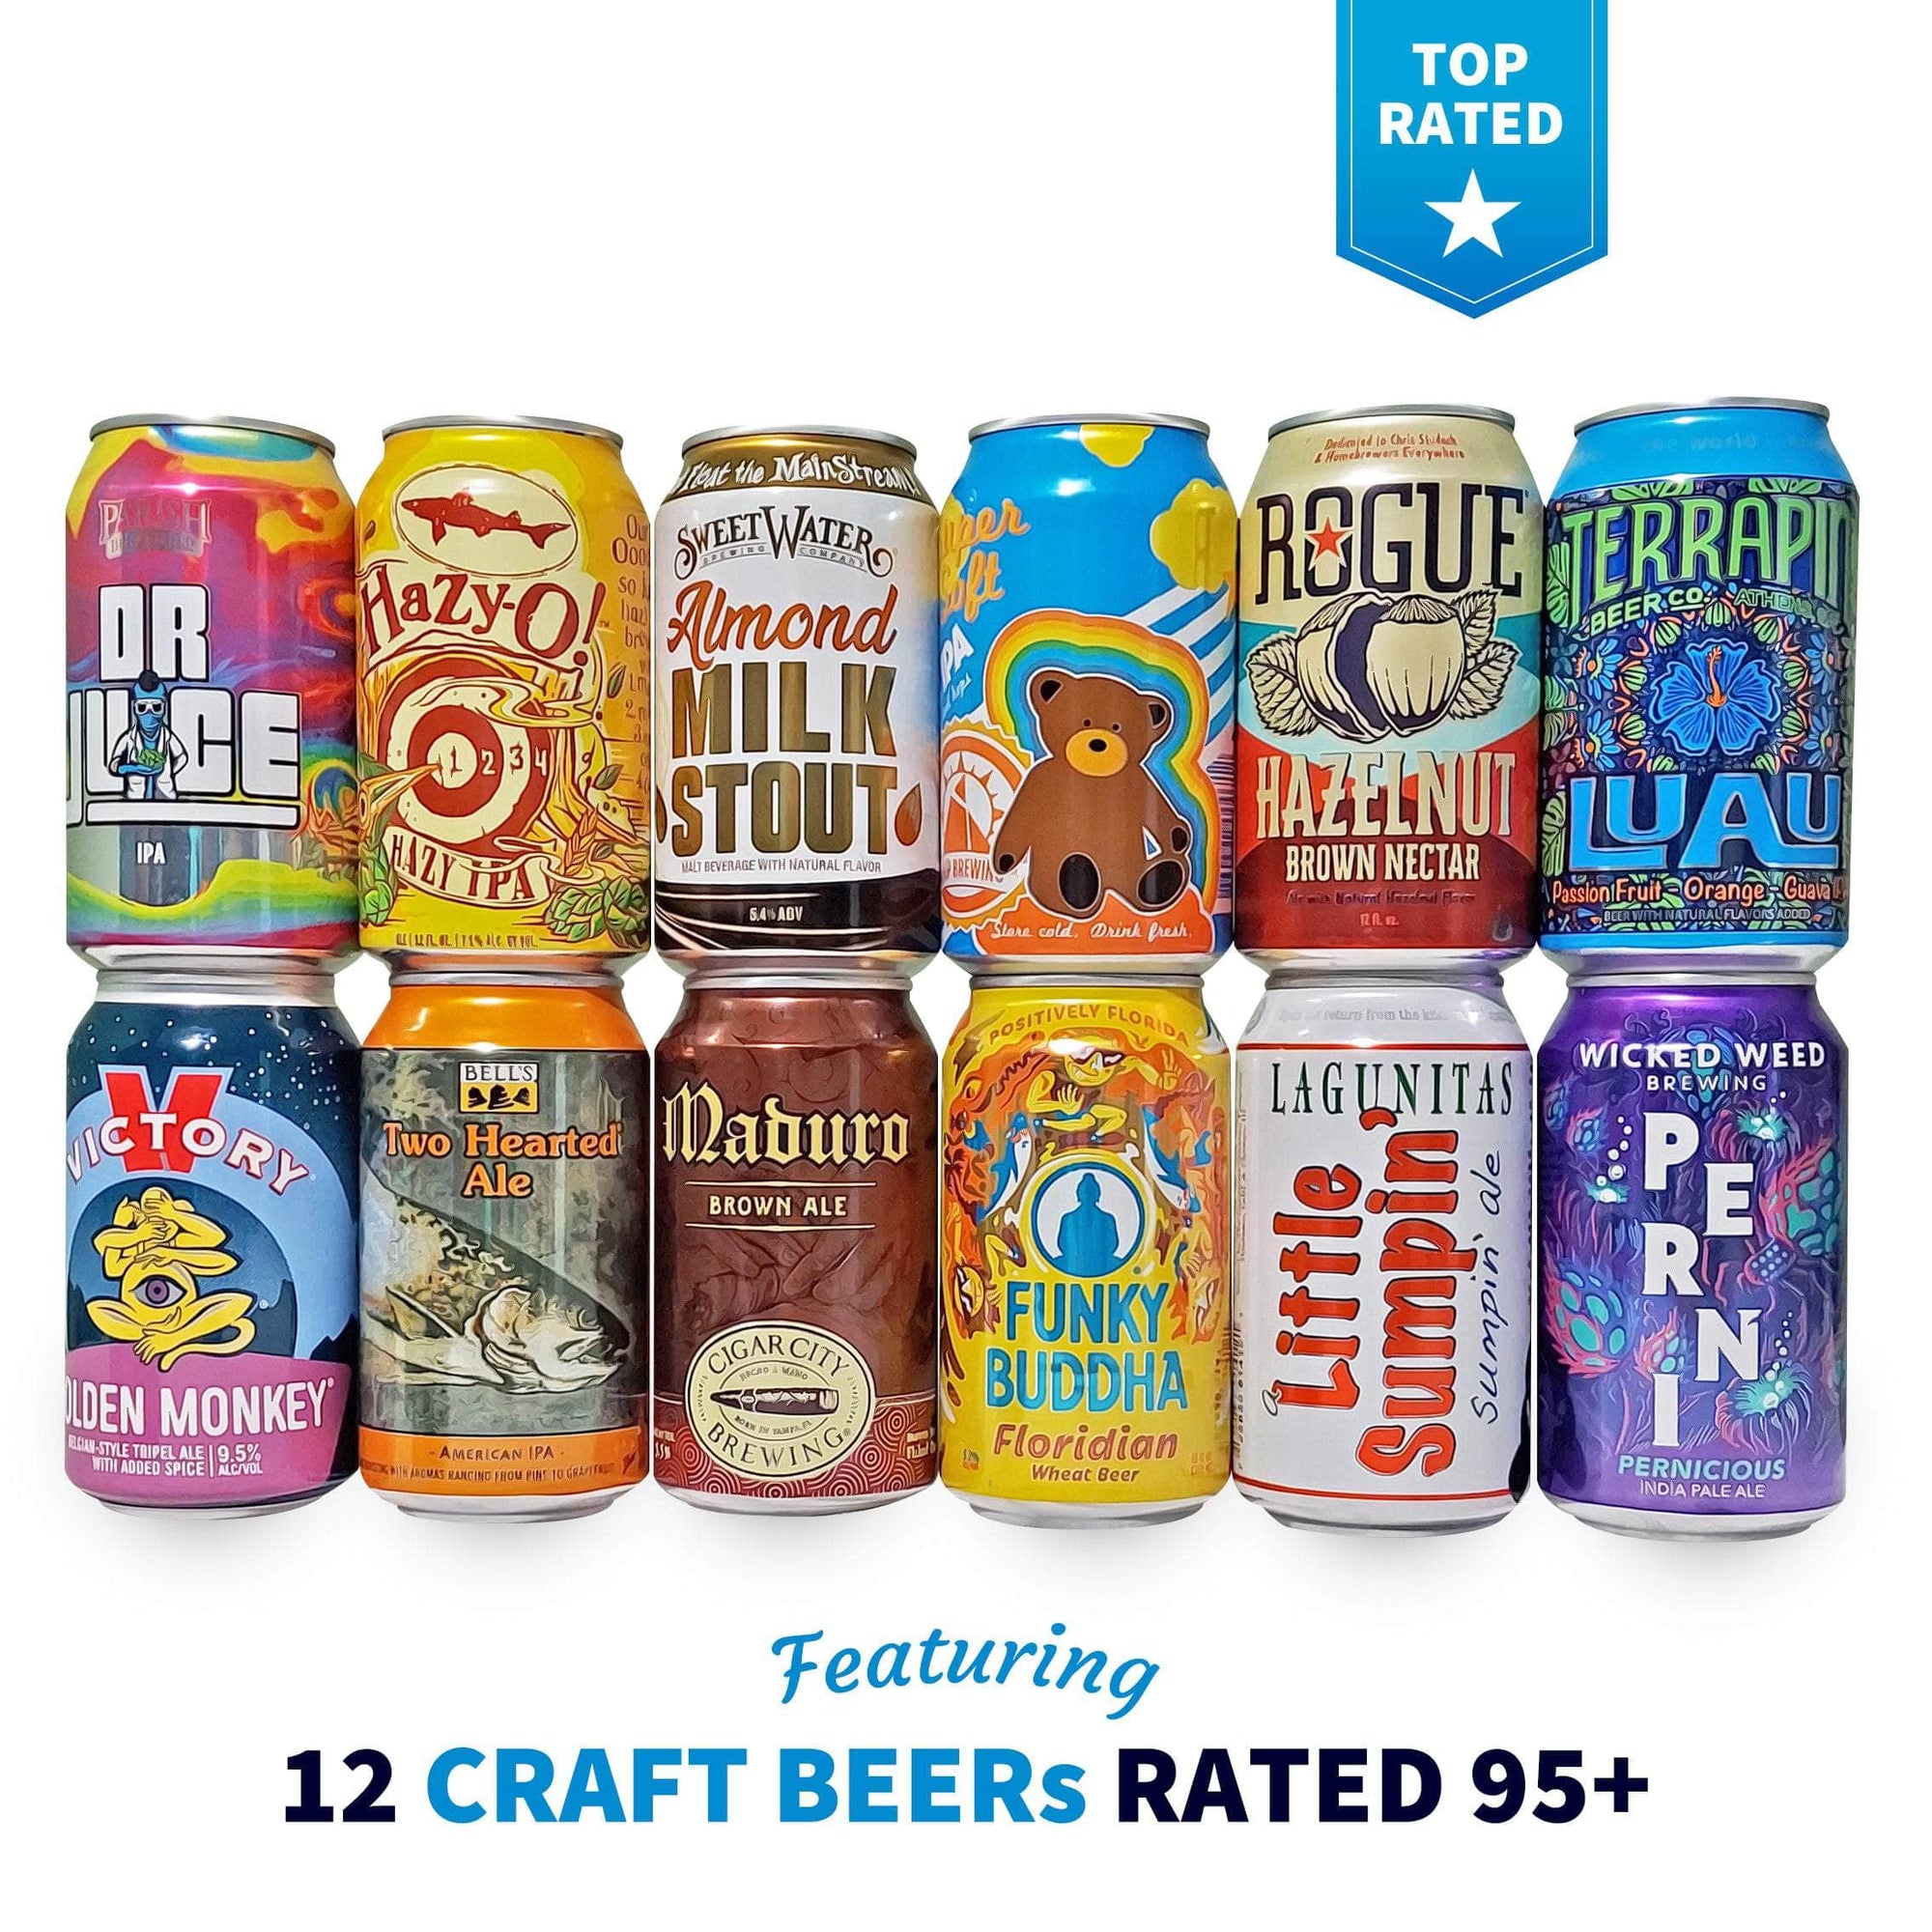 Top Rated Craft Beers of 2022